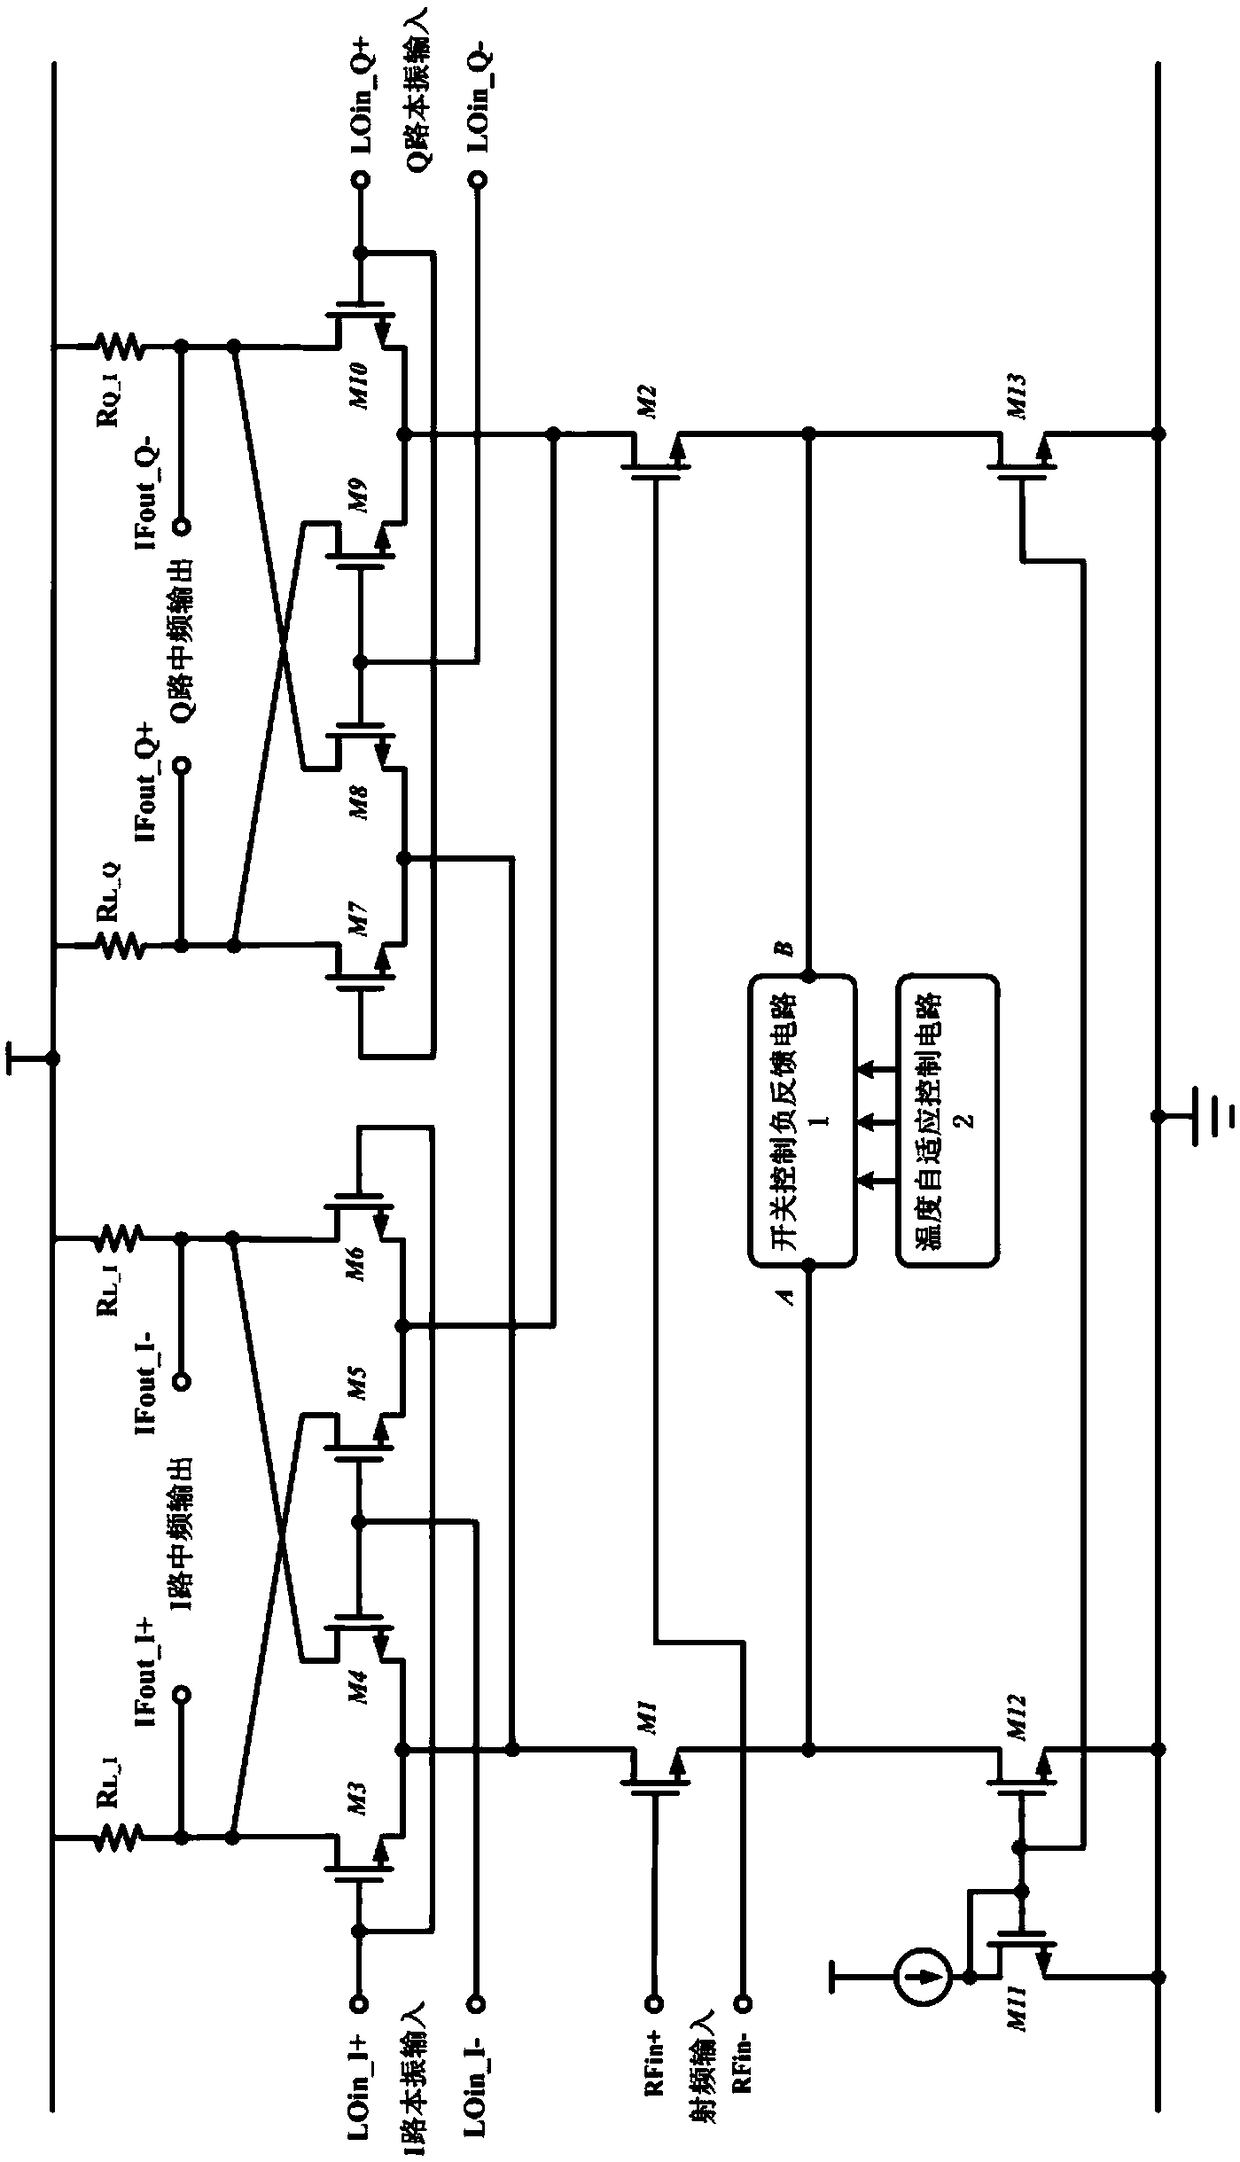 A CMOS Quadrature Mixer Circuit with Gain Varying Positively with Temperature